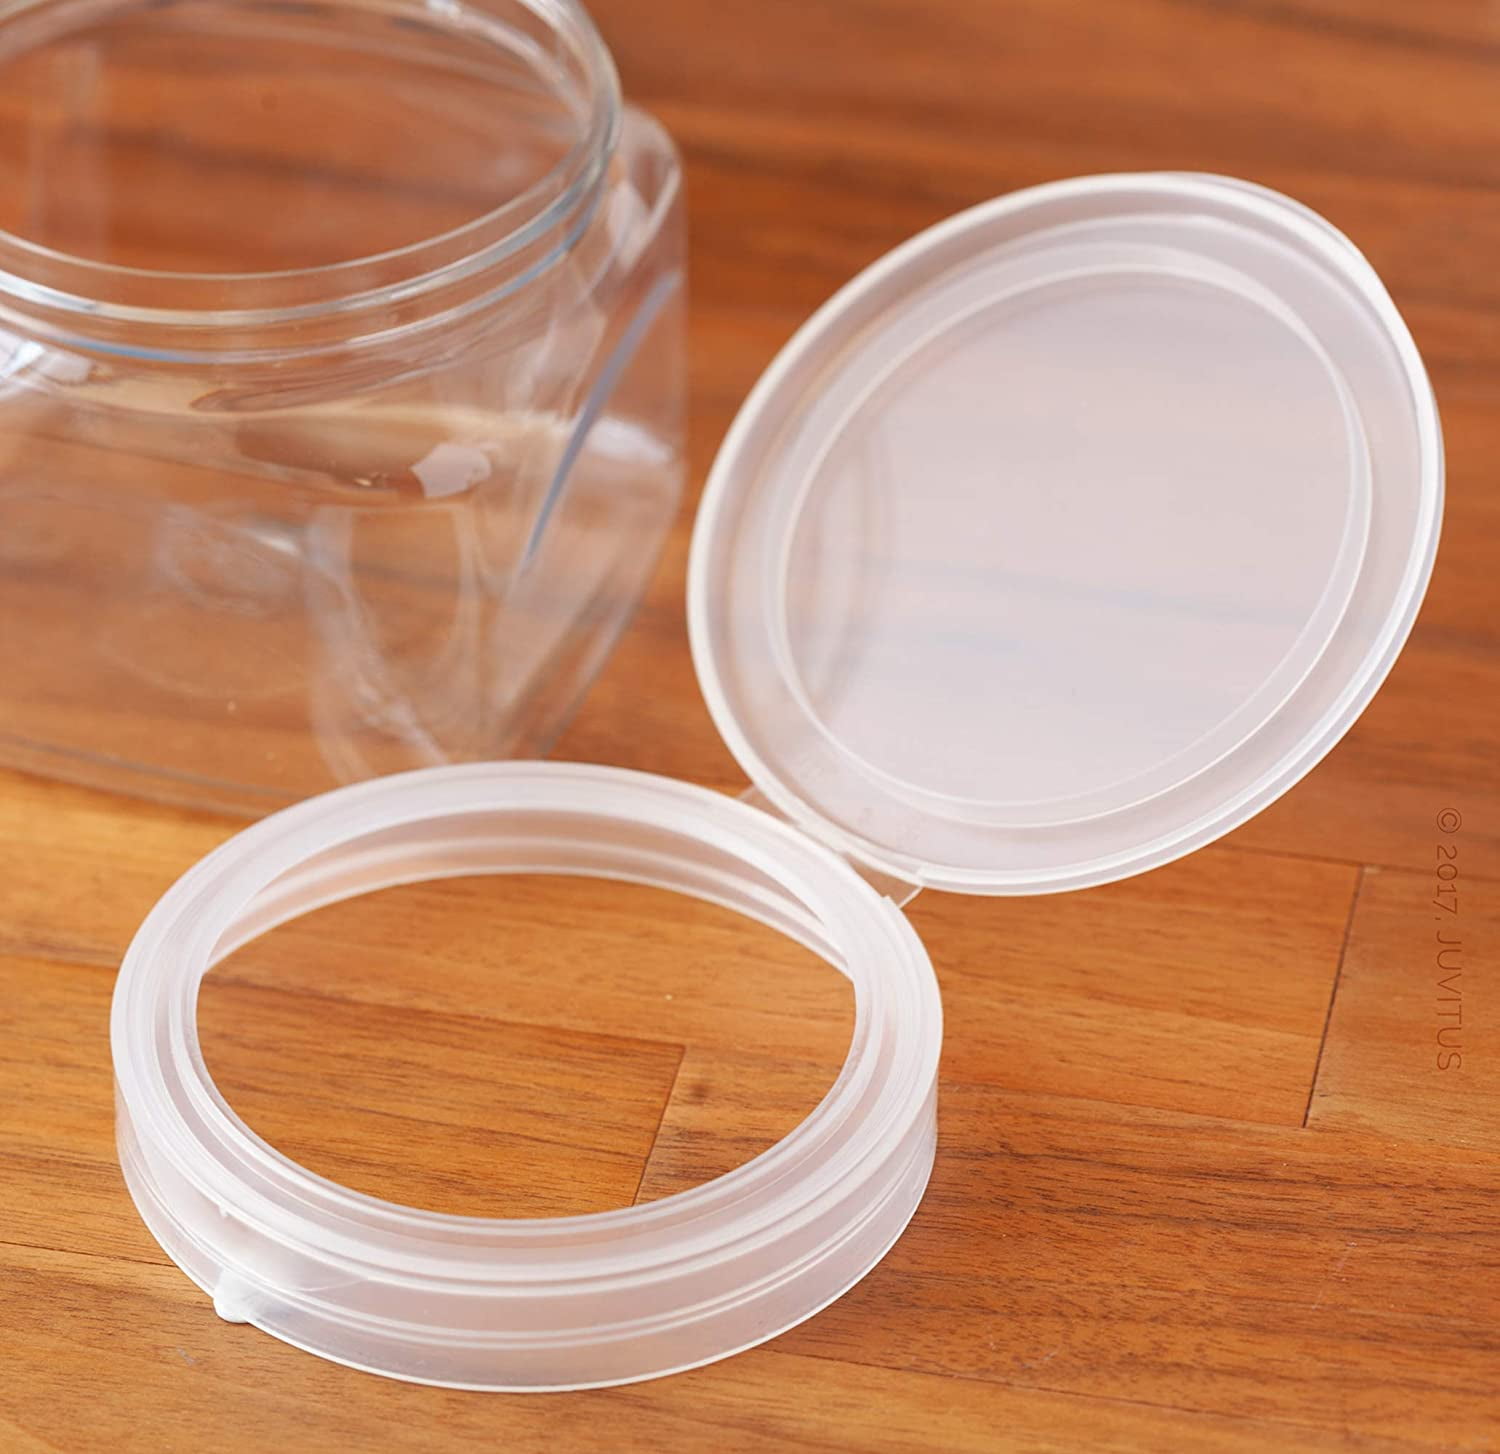 16 oz Clear Plastic Pet Square Jar (BPA Free) with White Smooth Lid (12 Pack)